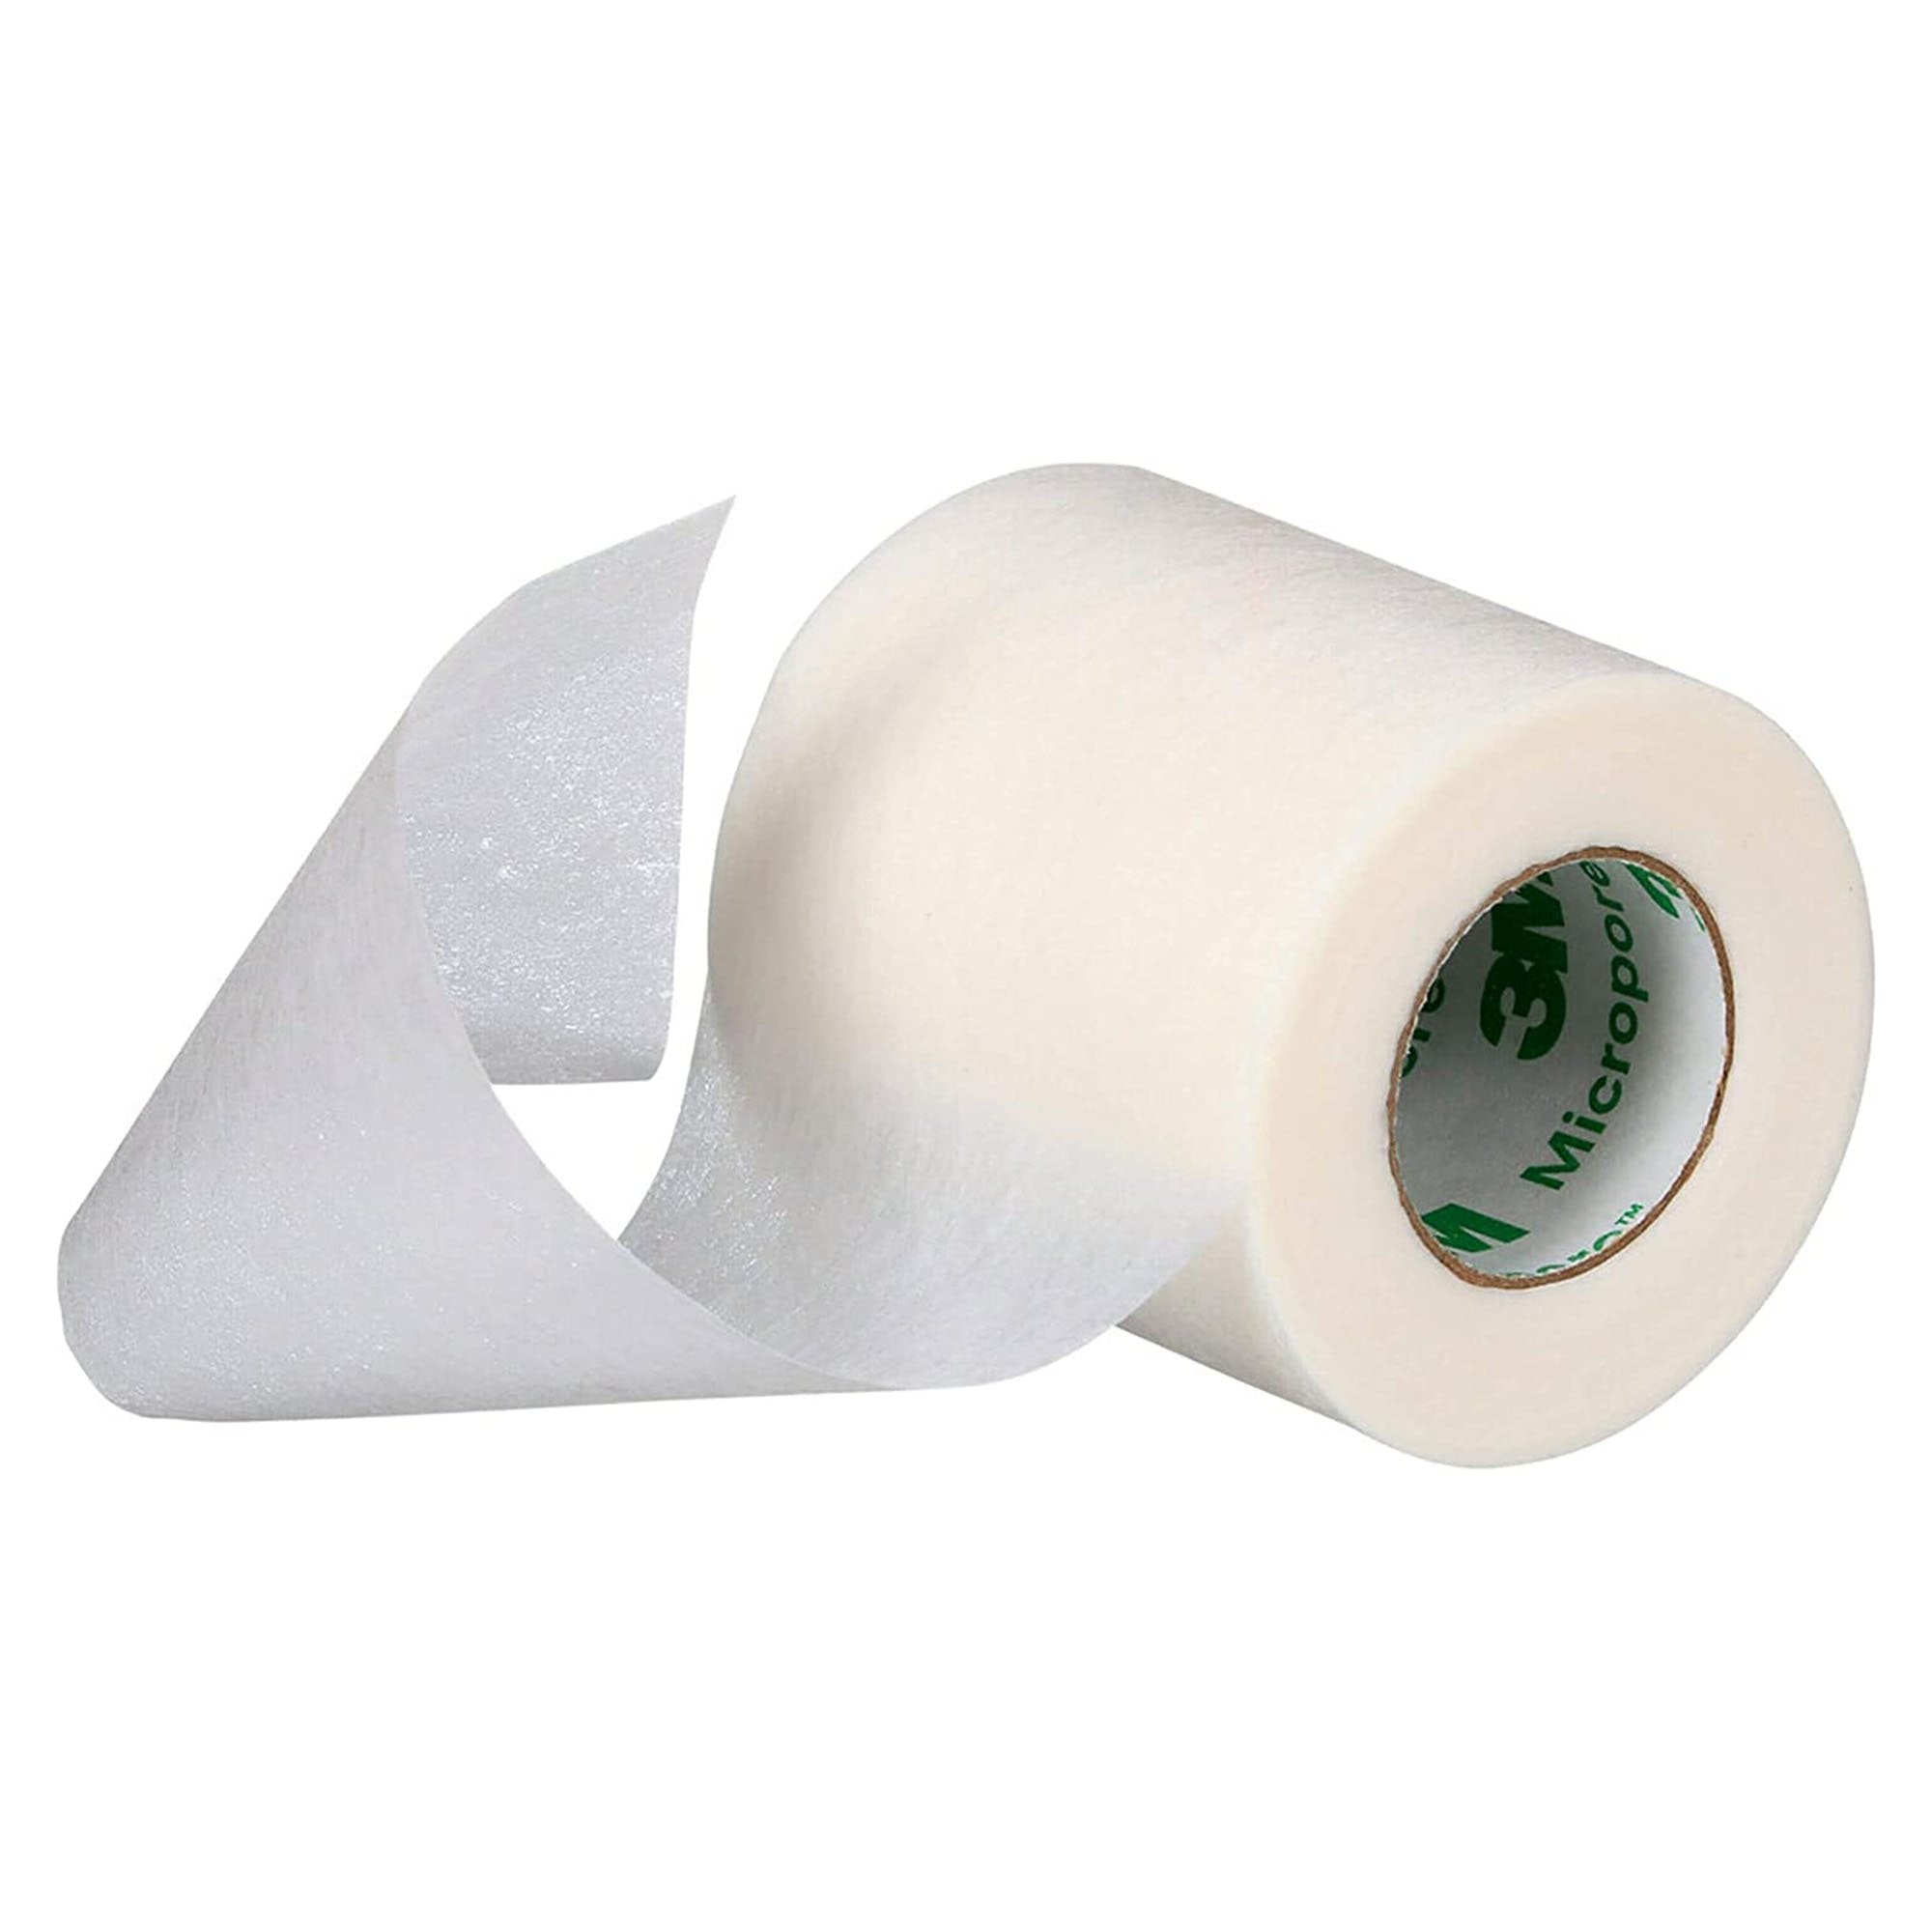 Medical Tape Nexcare™ Gentle White 2 Inch X 10 Yard Paper NonSterile